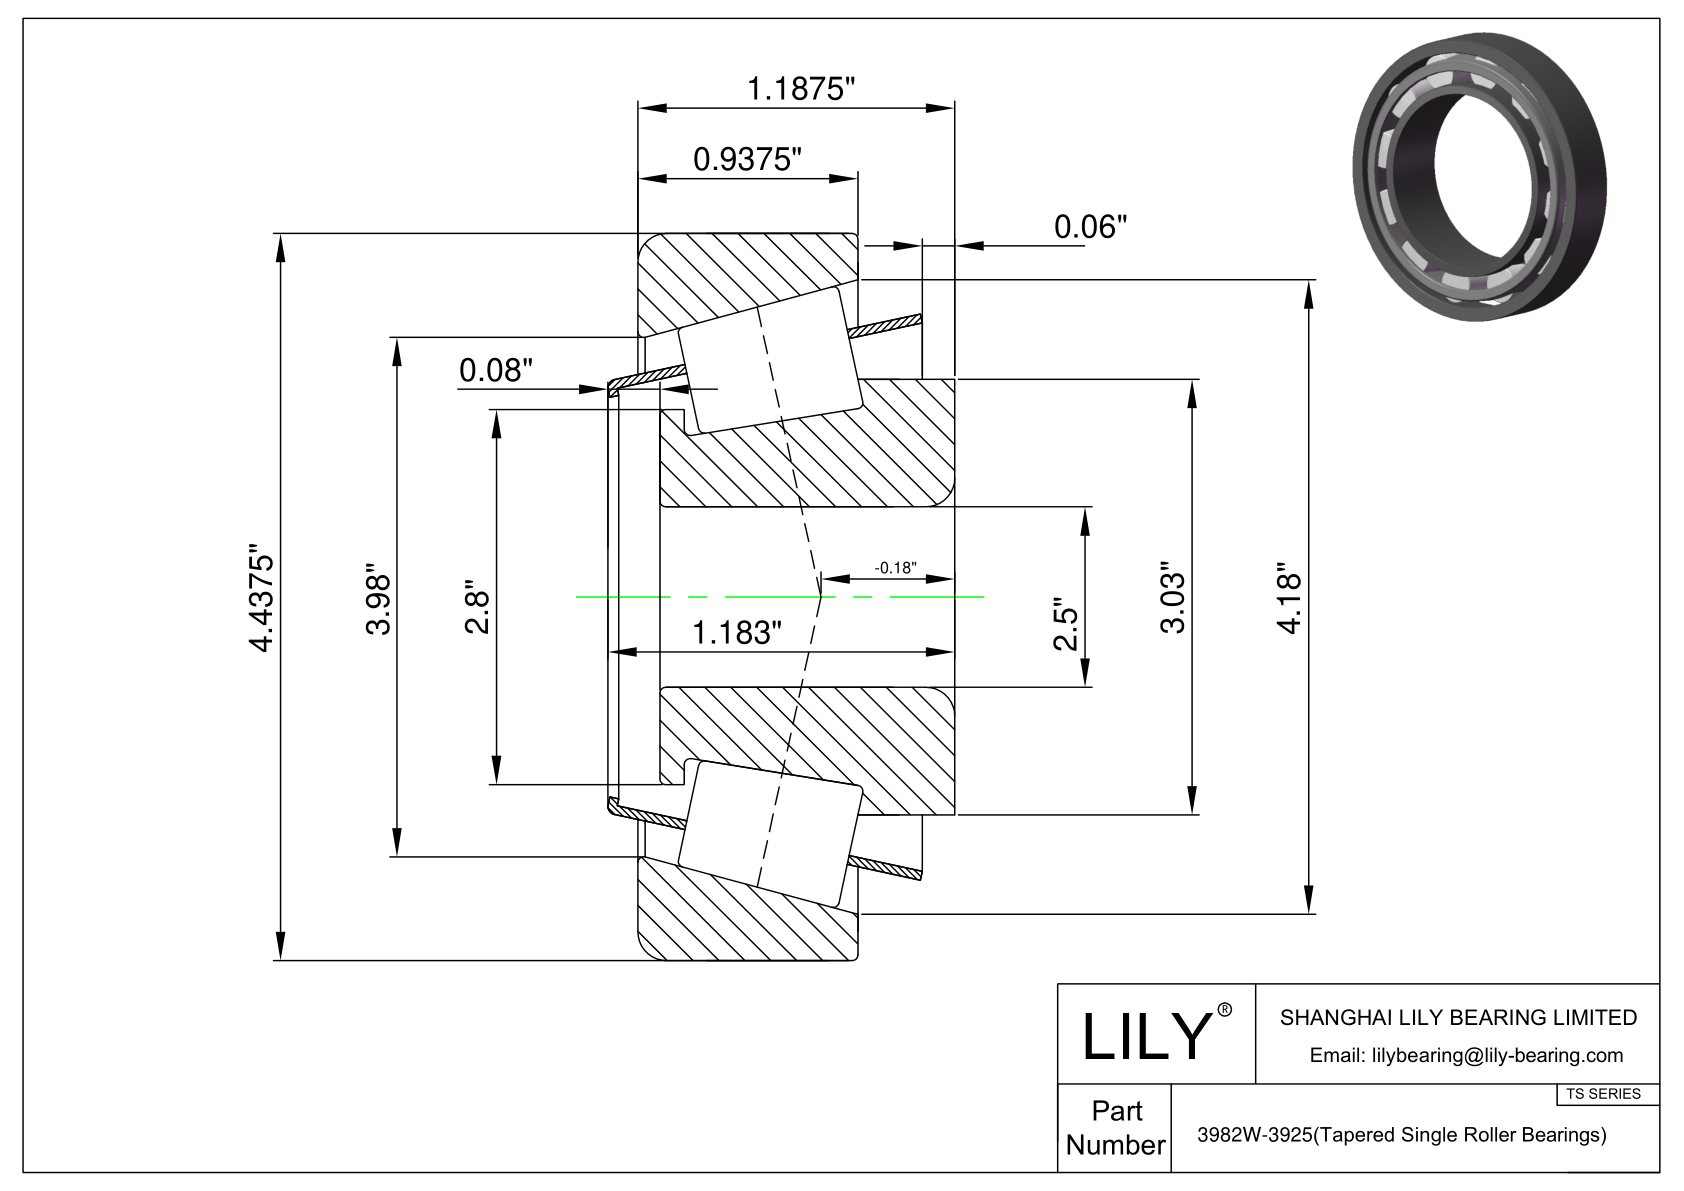 3982W-3925 TS (Tapered Single Roller Bearings) (Imperial) cad drawing